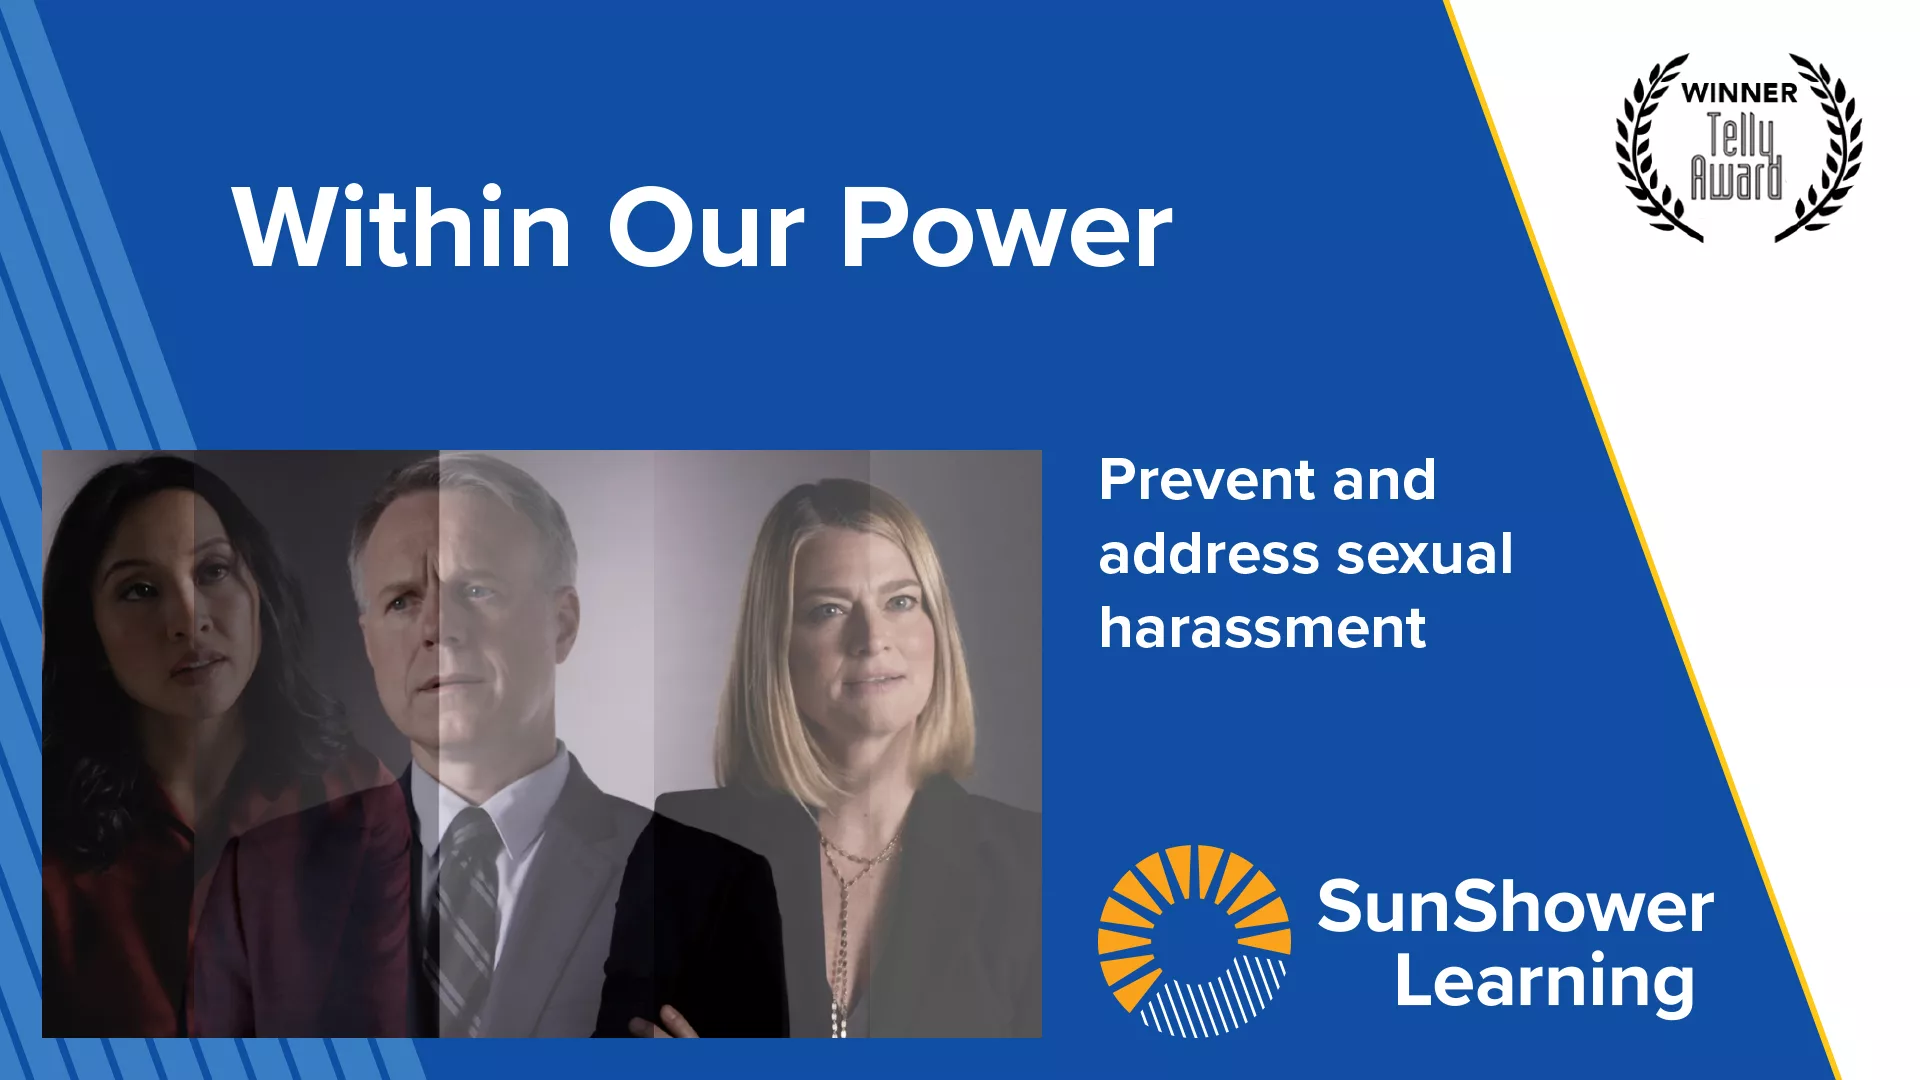 Thumbnail image with title, Within Our Power and text: Prevent and address sexual harassment. Telly award seal.